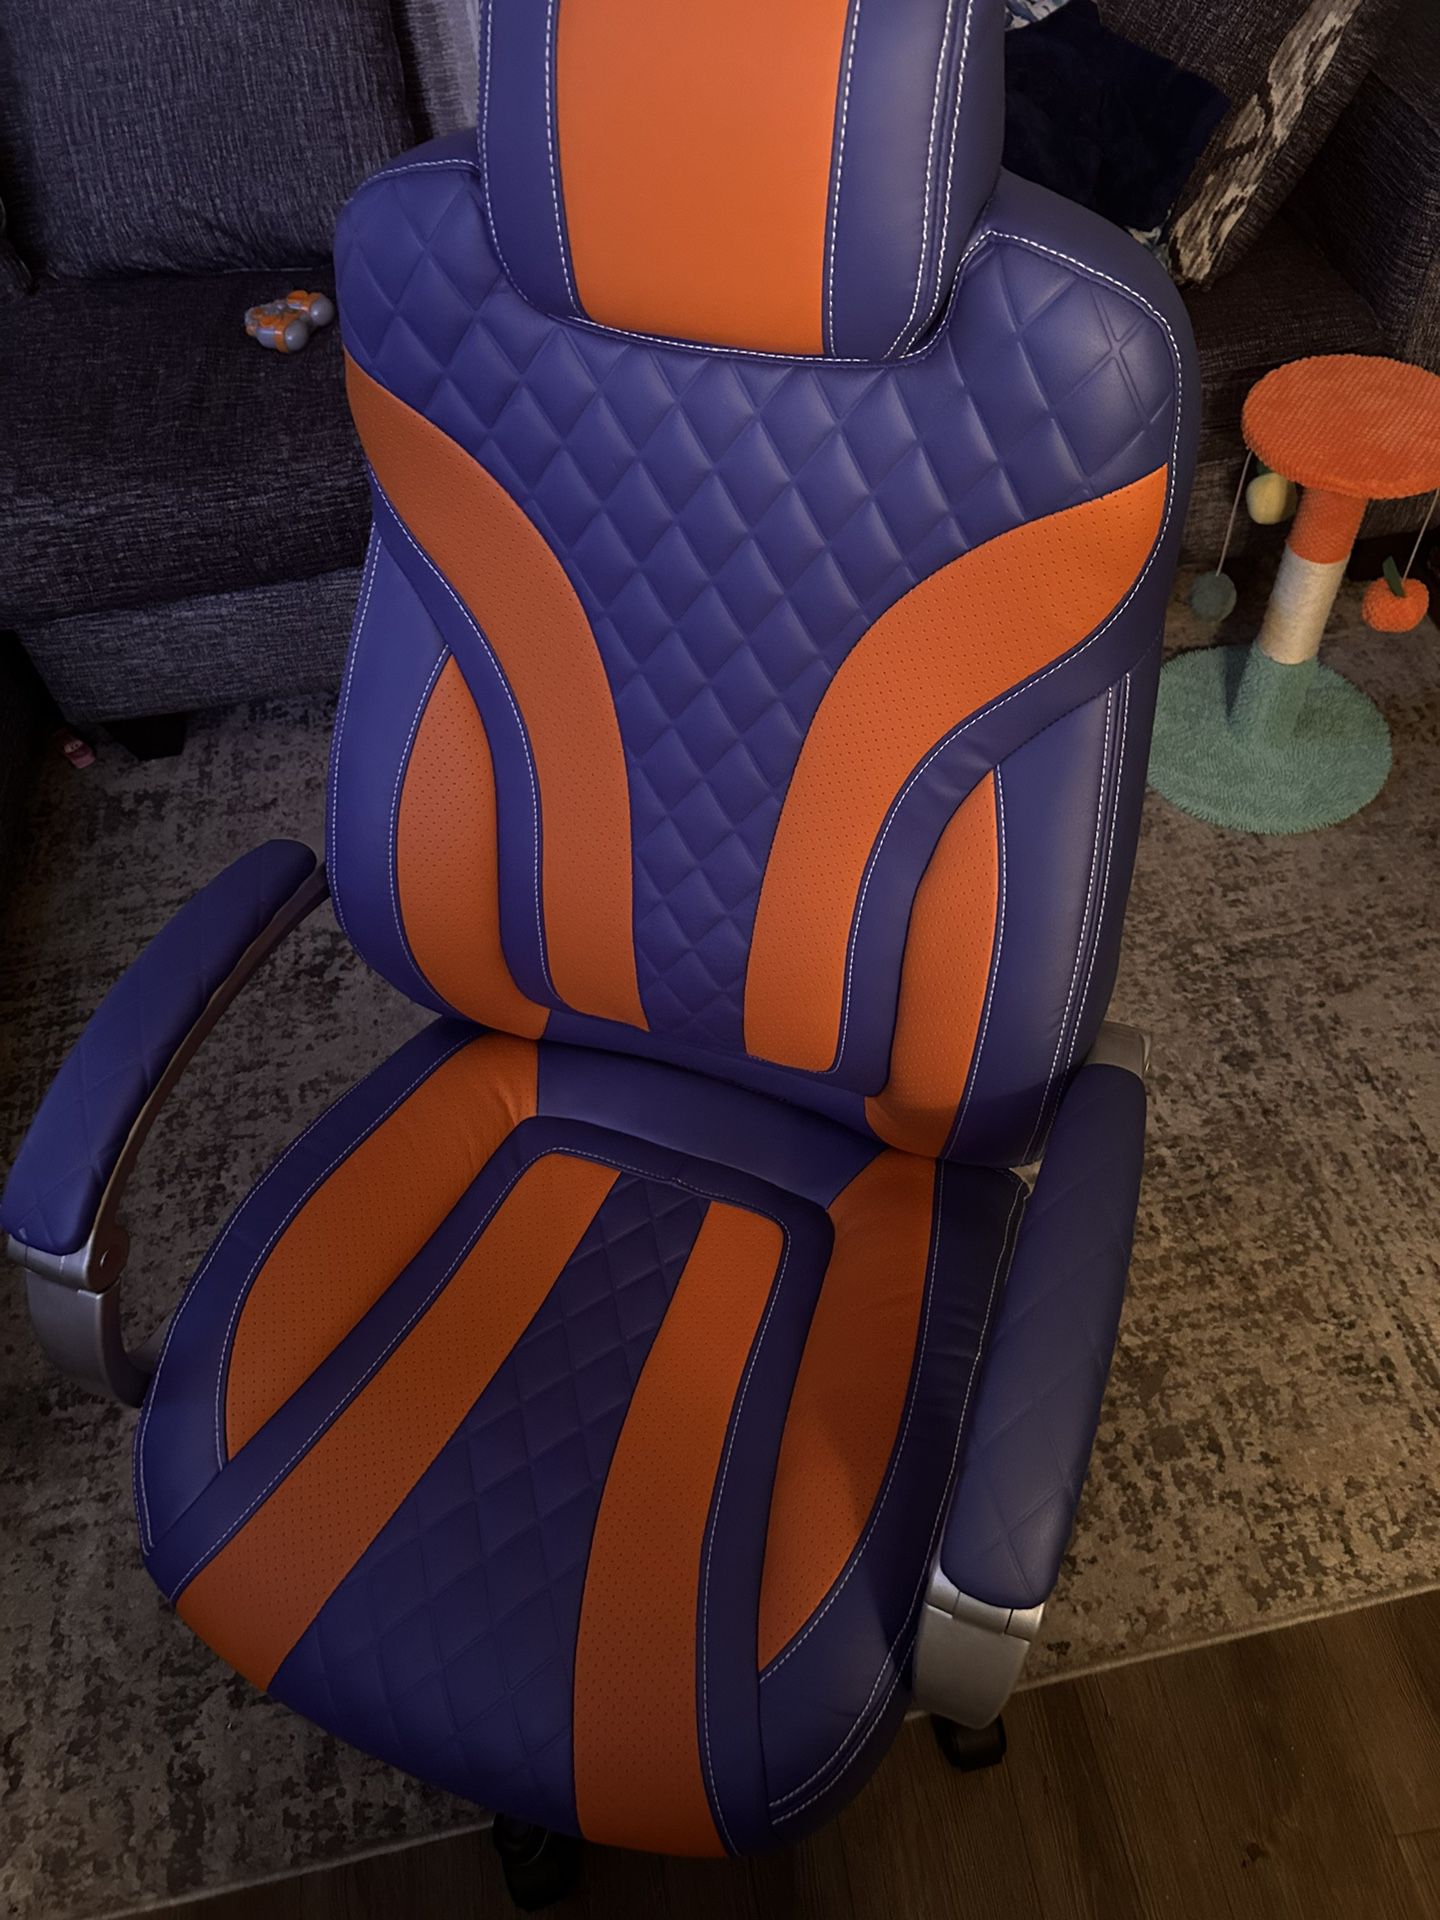 Bronco Gaming Chair 